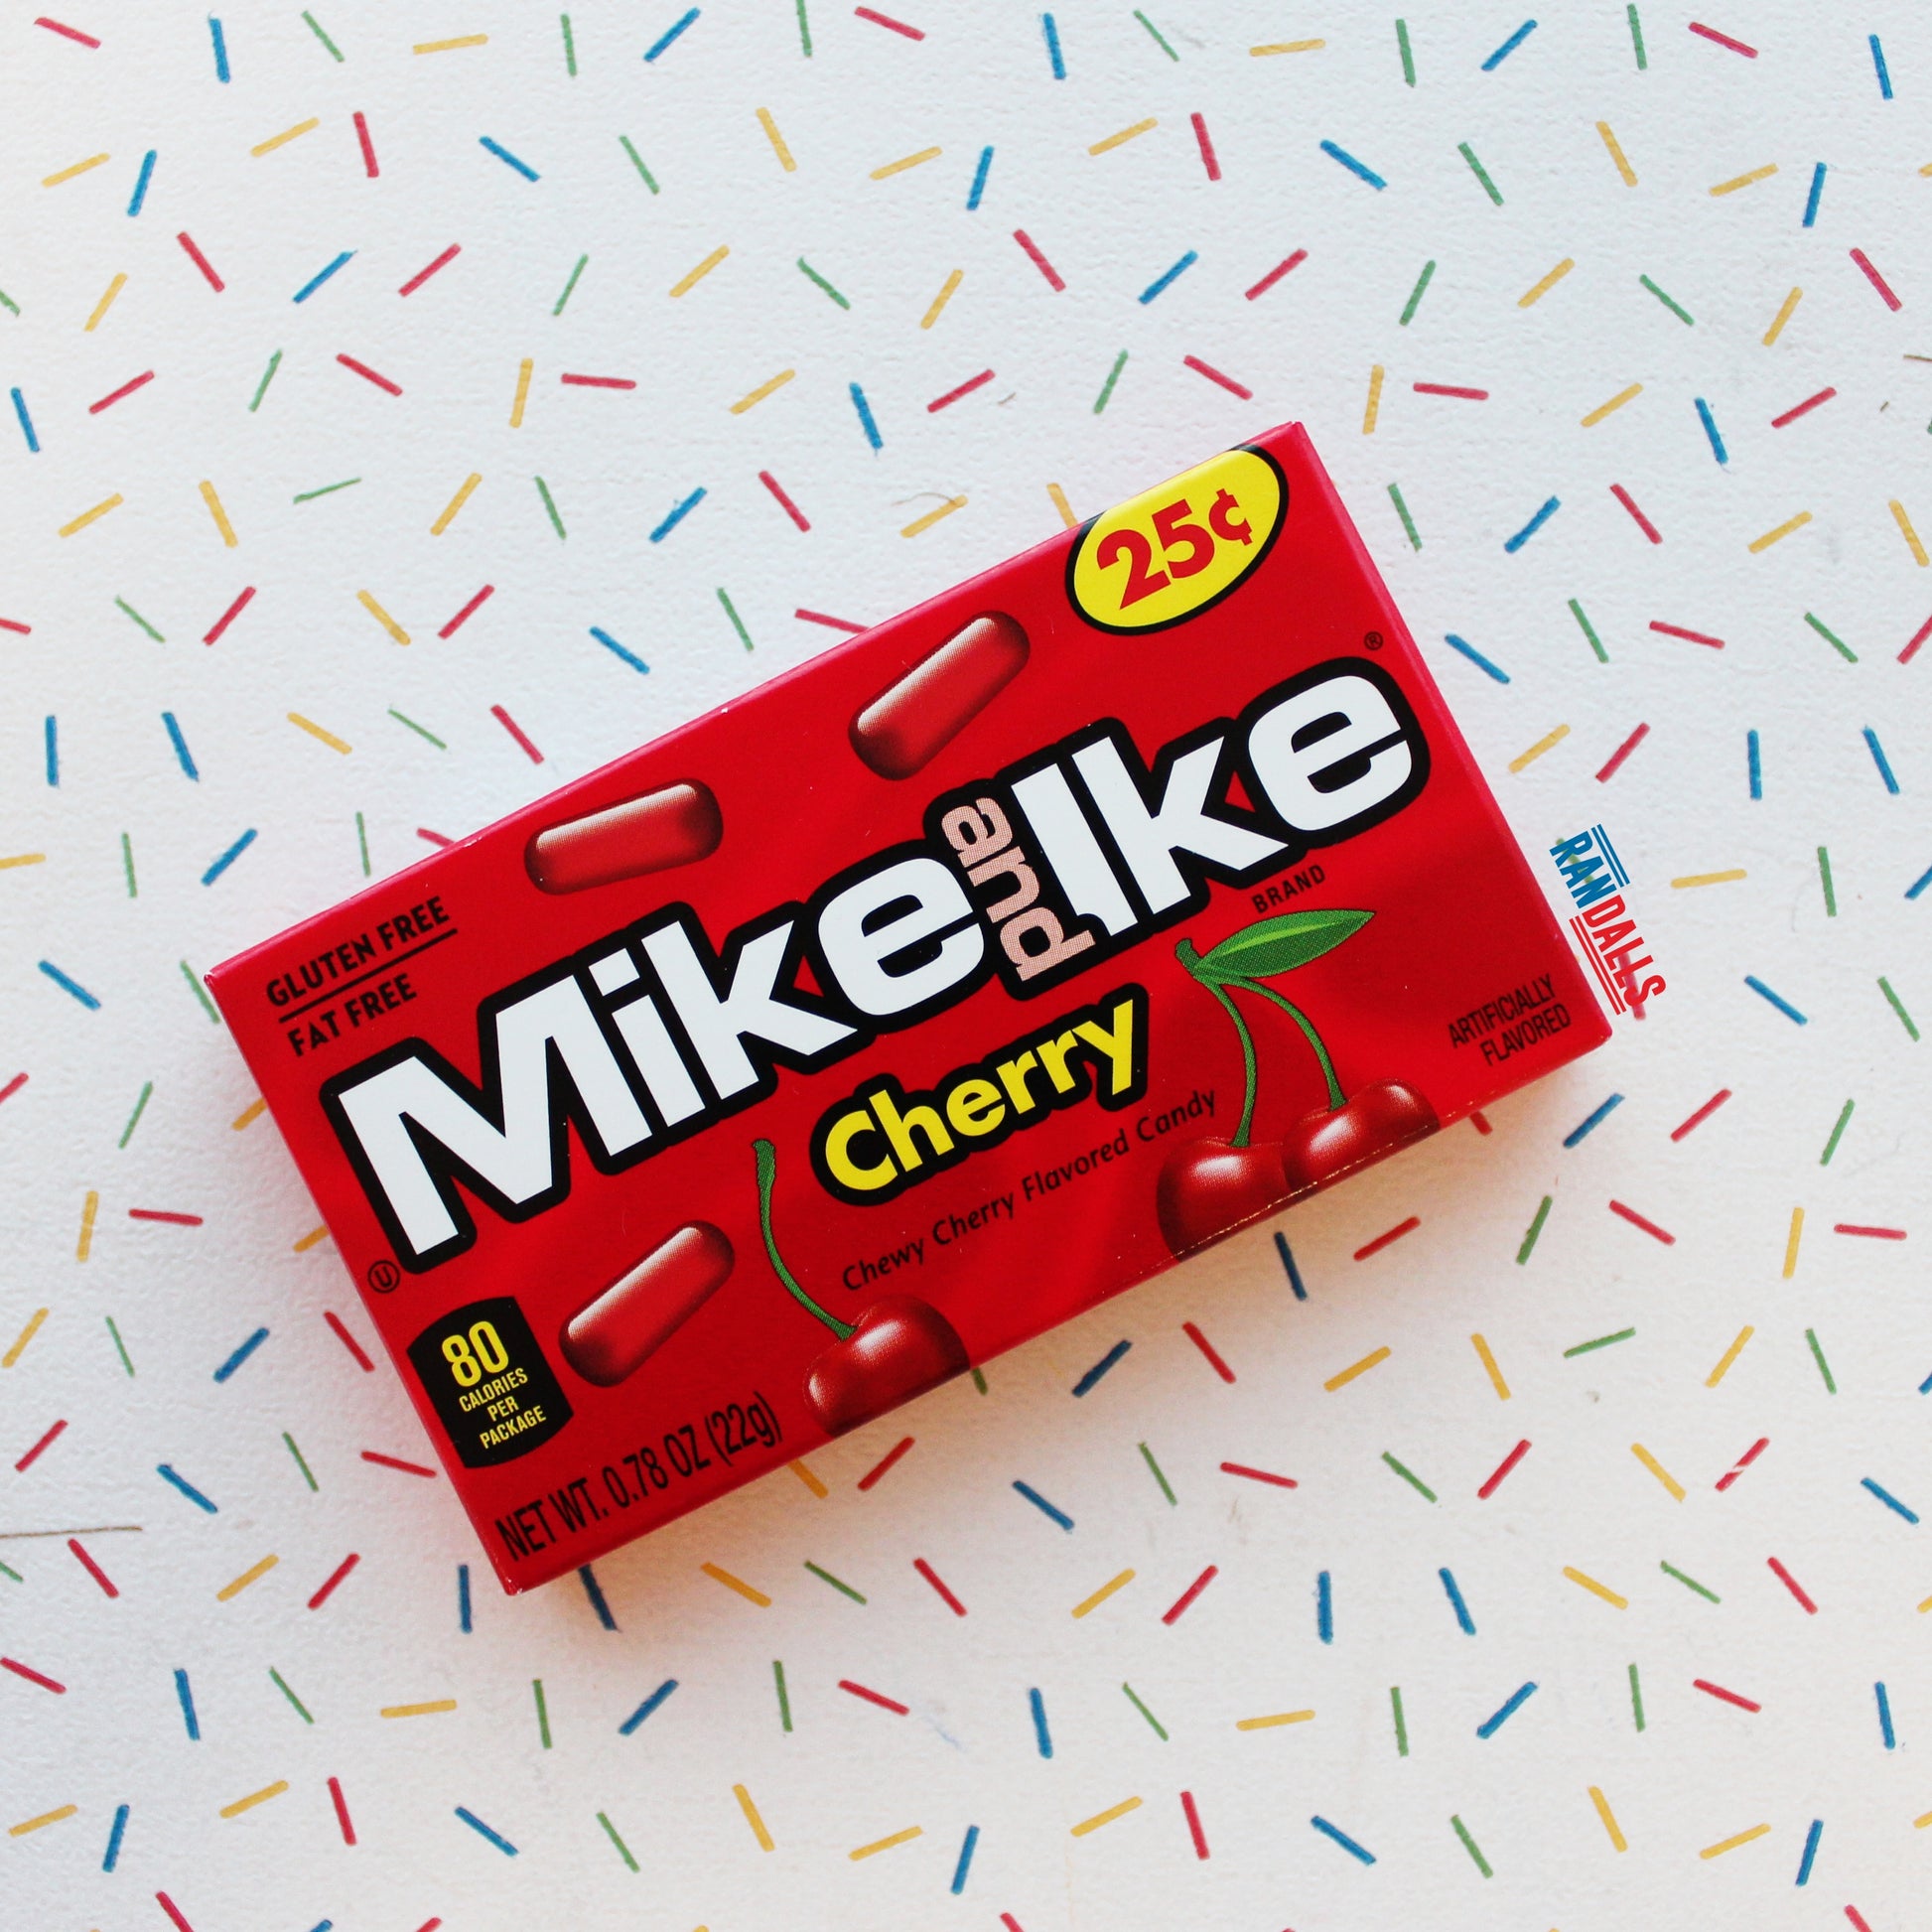 mike and ike cherry mini, box, sweets, candy, chewy, gluten free, fat free, randalls, usa